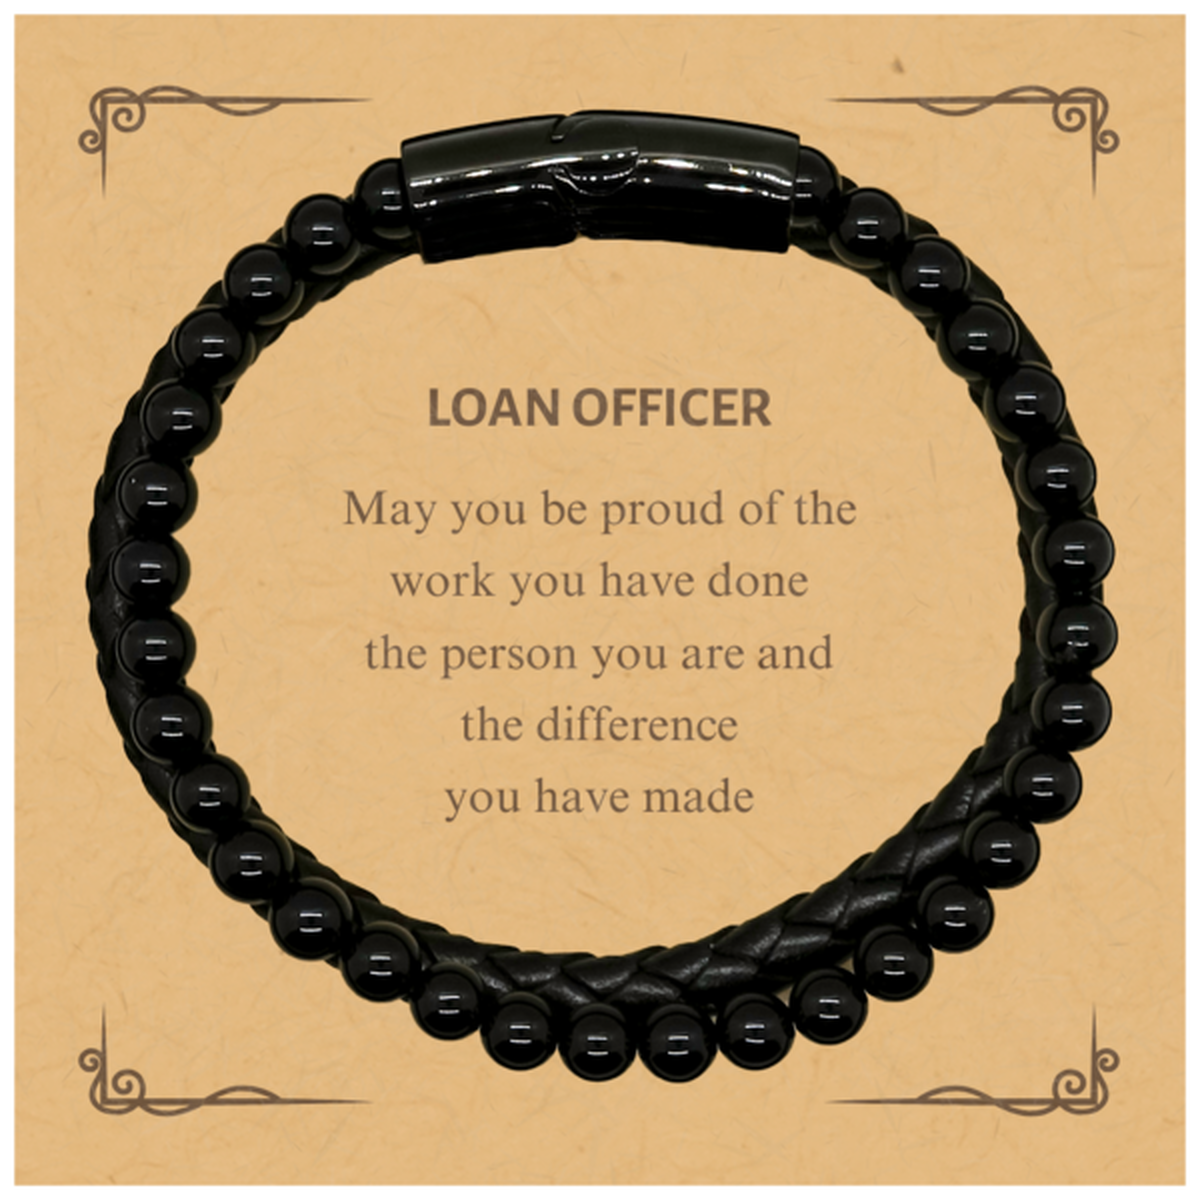 Loan Officer May you be proud of the work you have done, Retirement Loan Officer Stone Leather Bracelets for Colleague Appreciation Gifts Amazing for Loan Officer